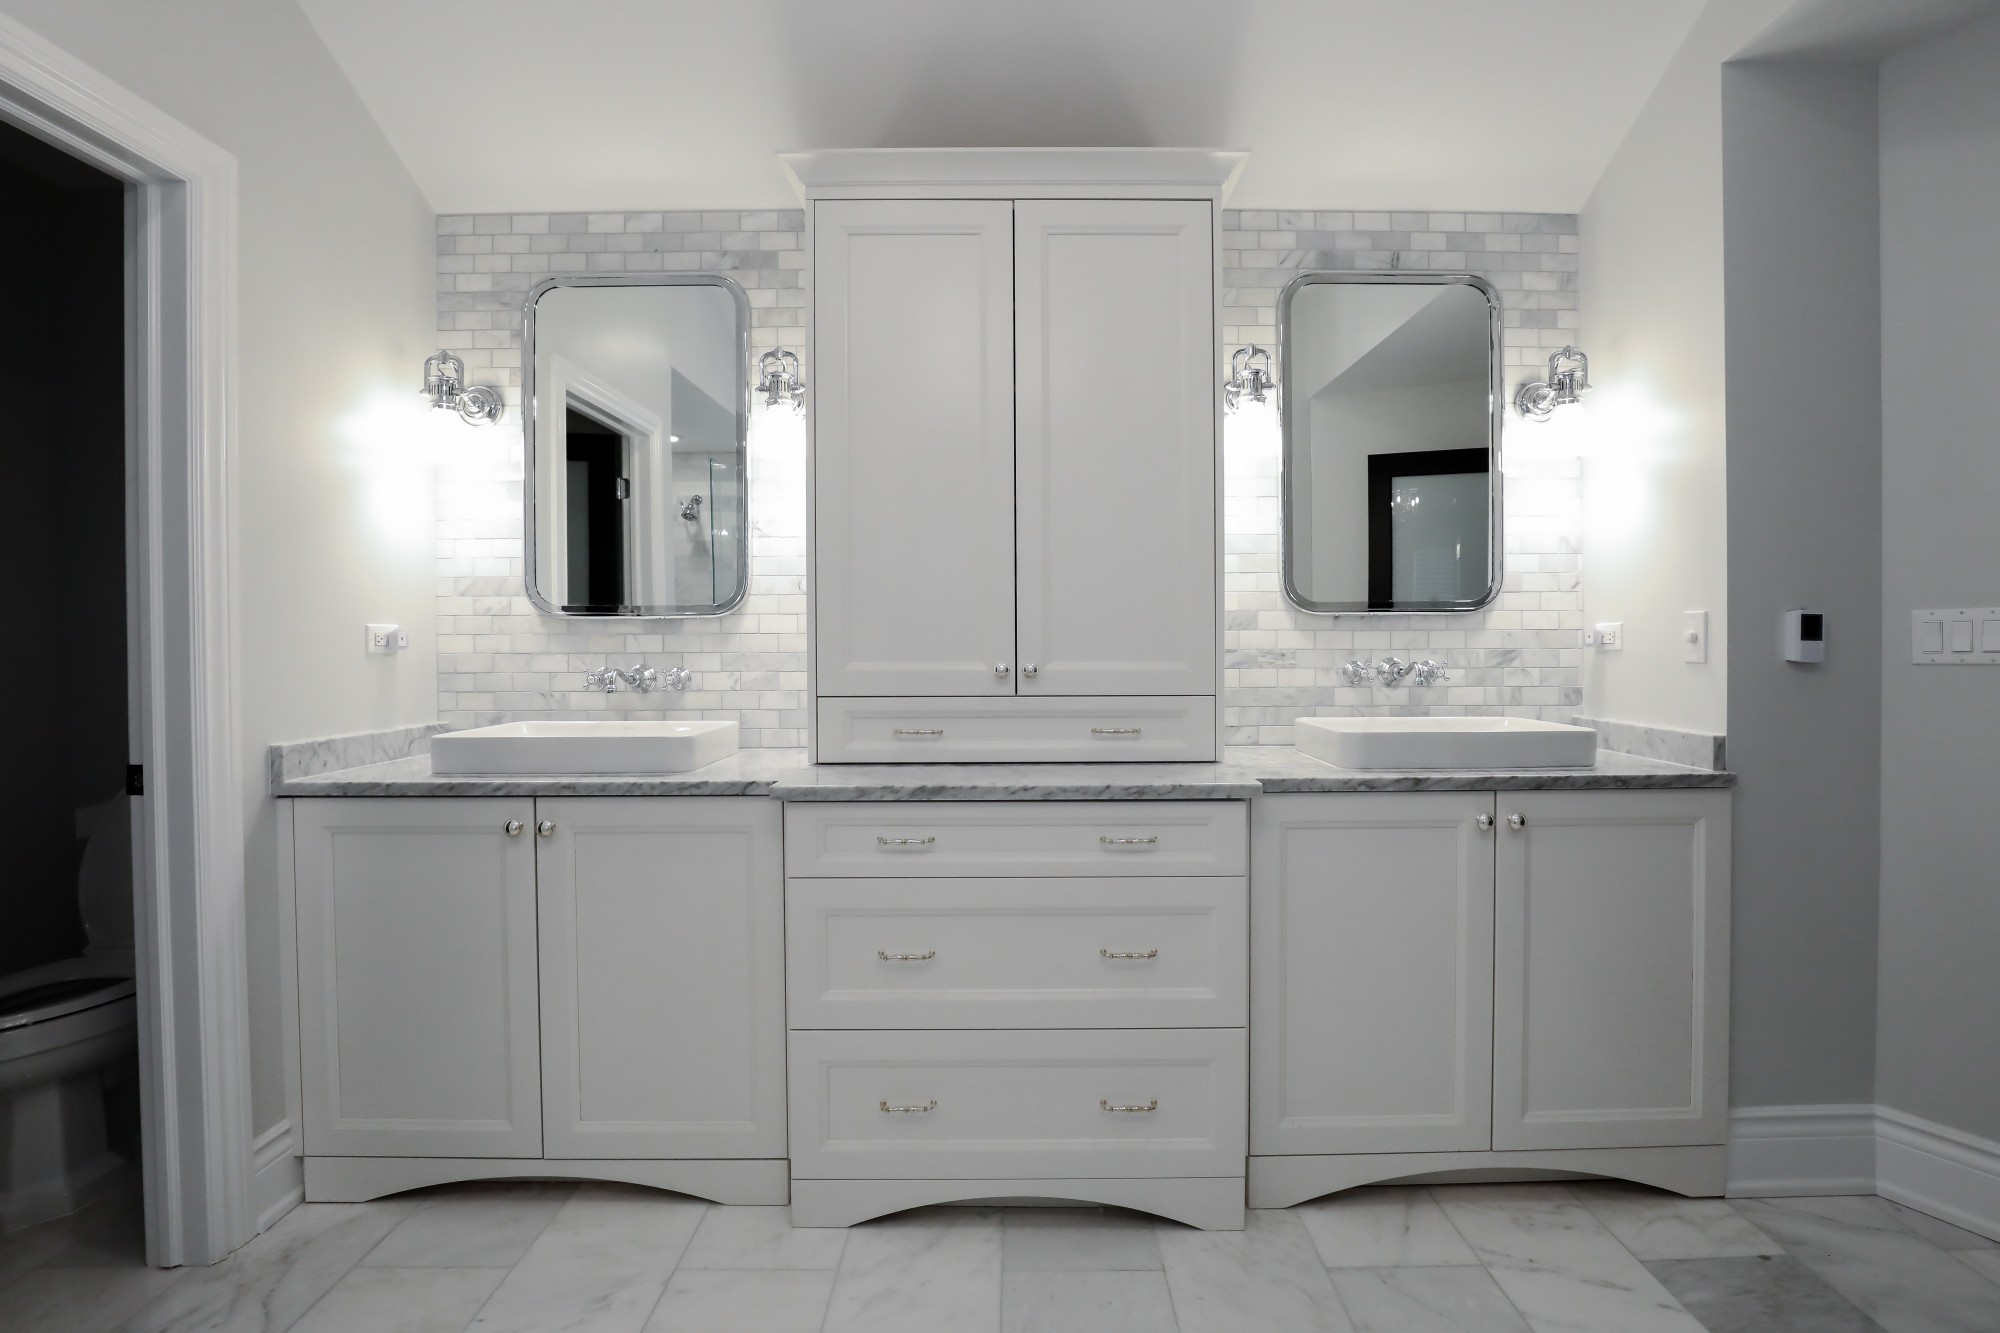 Gallery Kitchen And Bathroom Cabinets, White Vanity Cabinets For Bathrooms